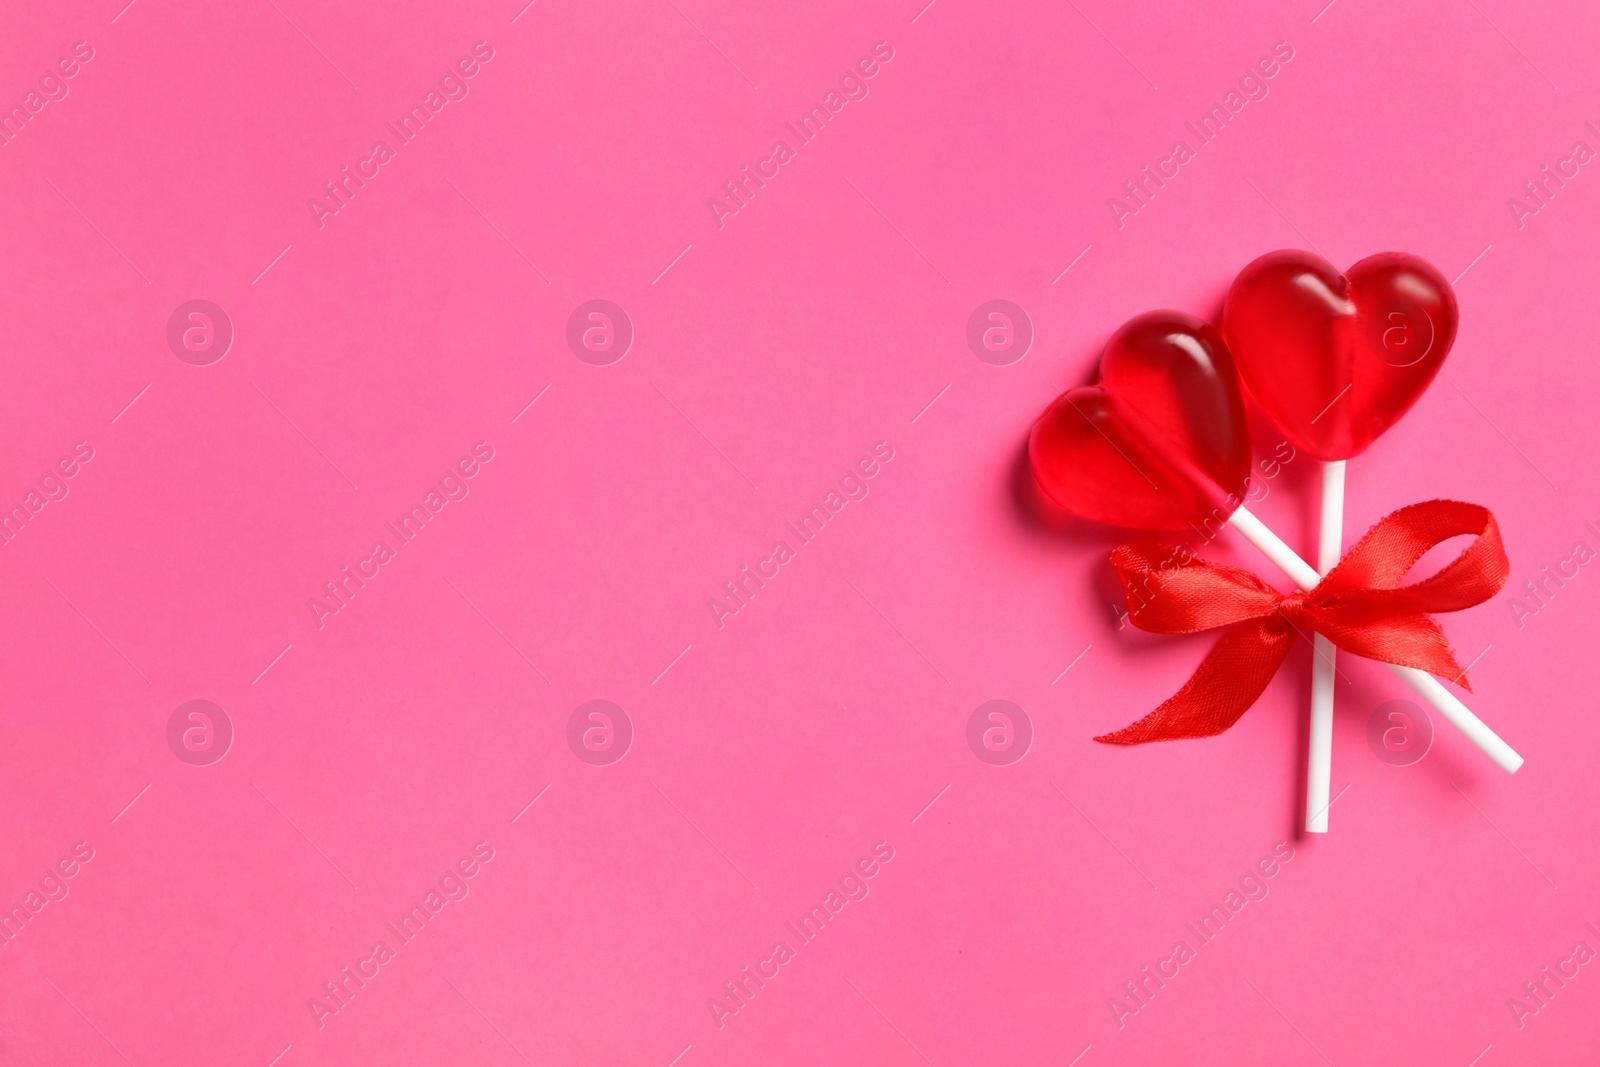 Photo of Sweet heart shaped lollipops on pink background, top view with space for text. Valentine's day celebration